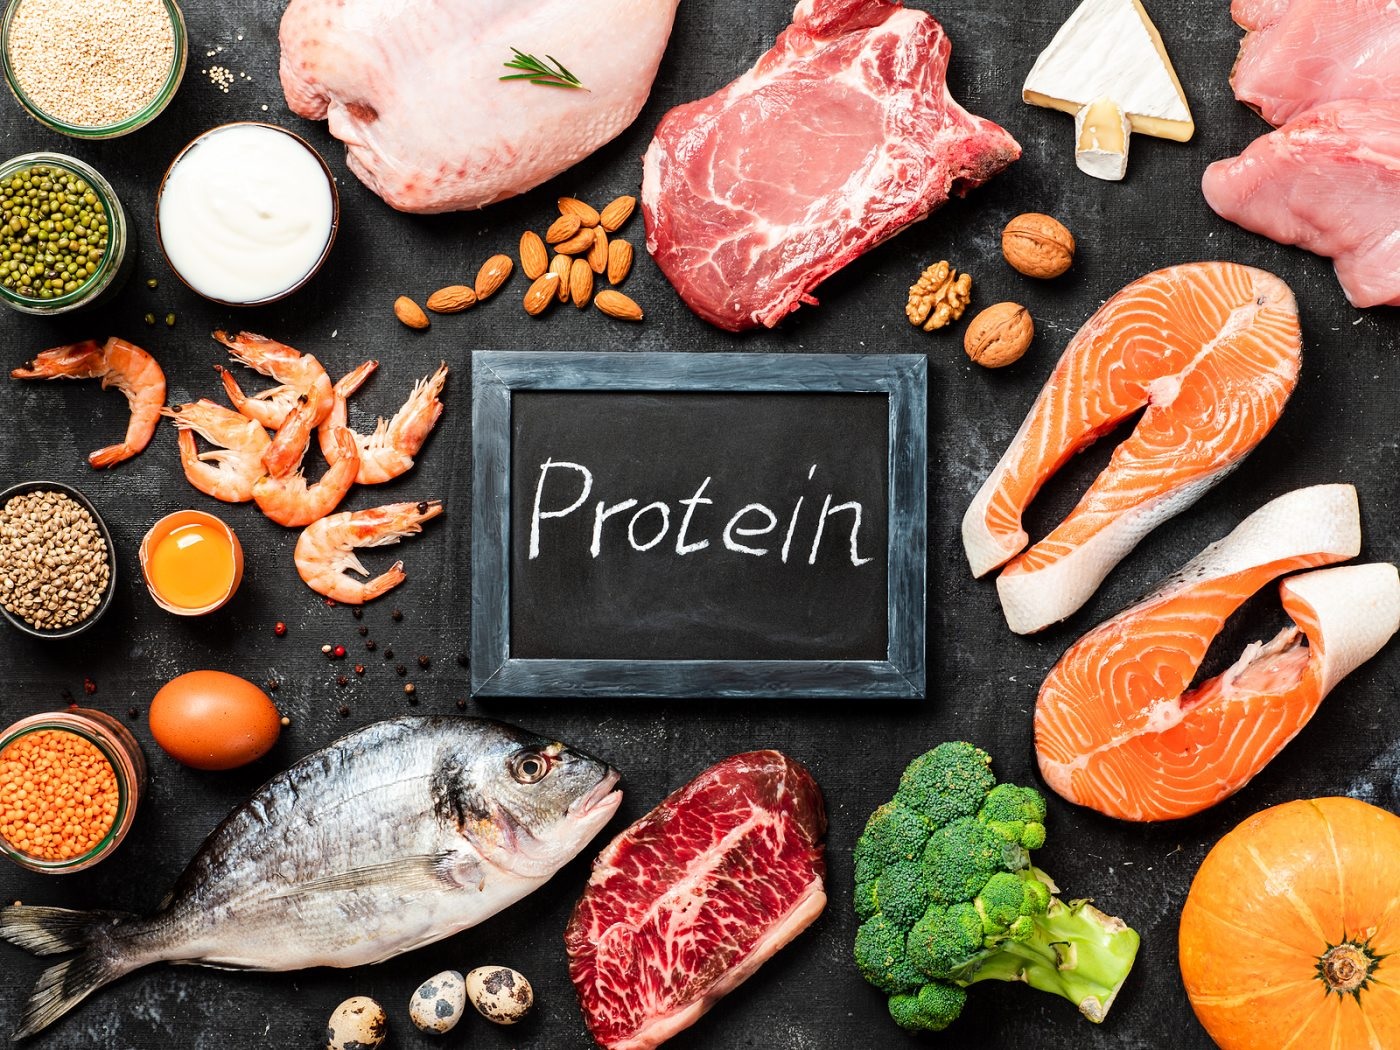 Why is protein important in your diet